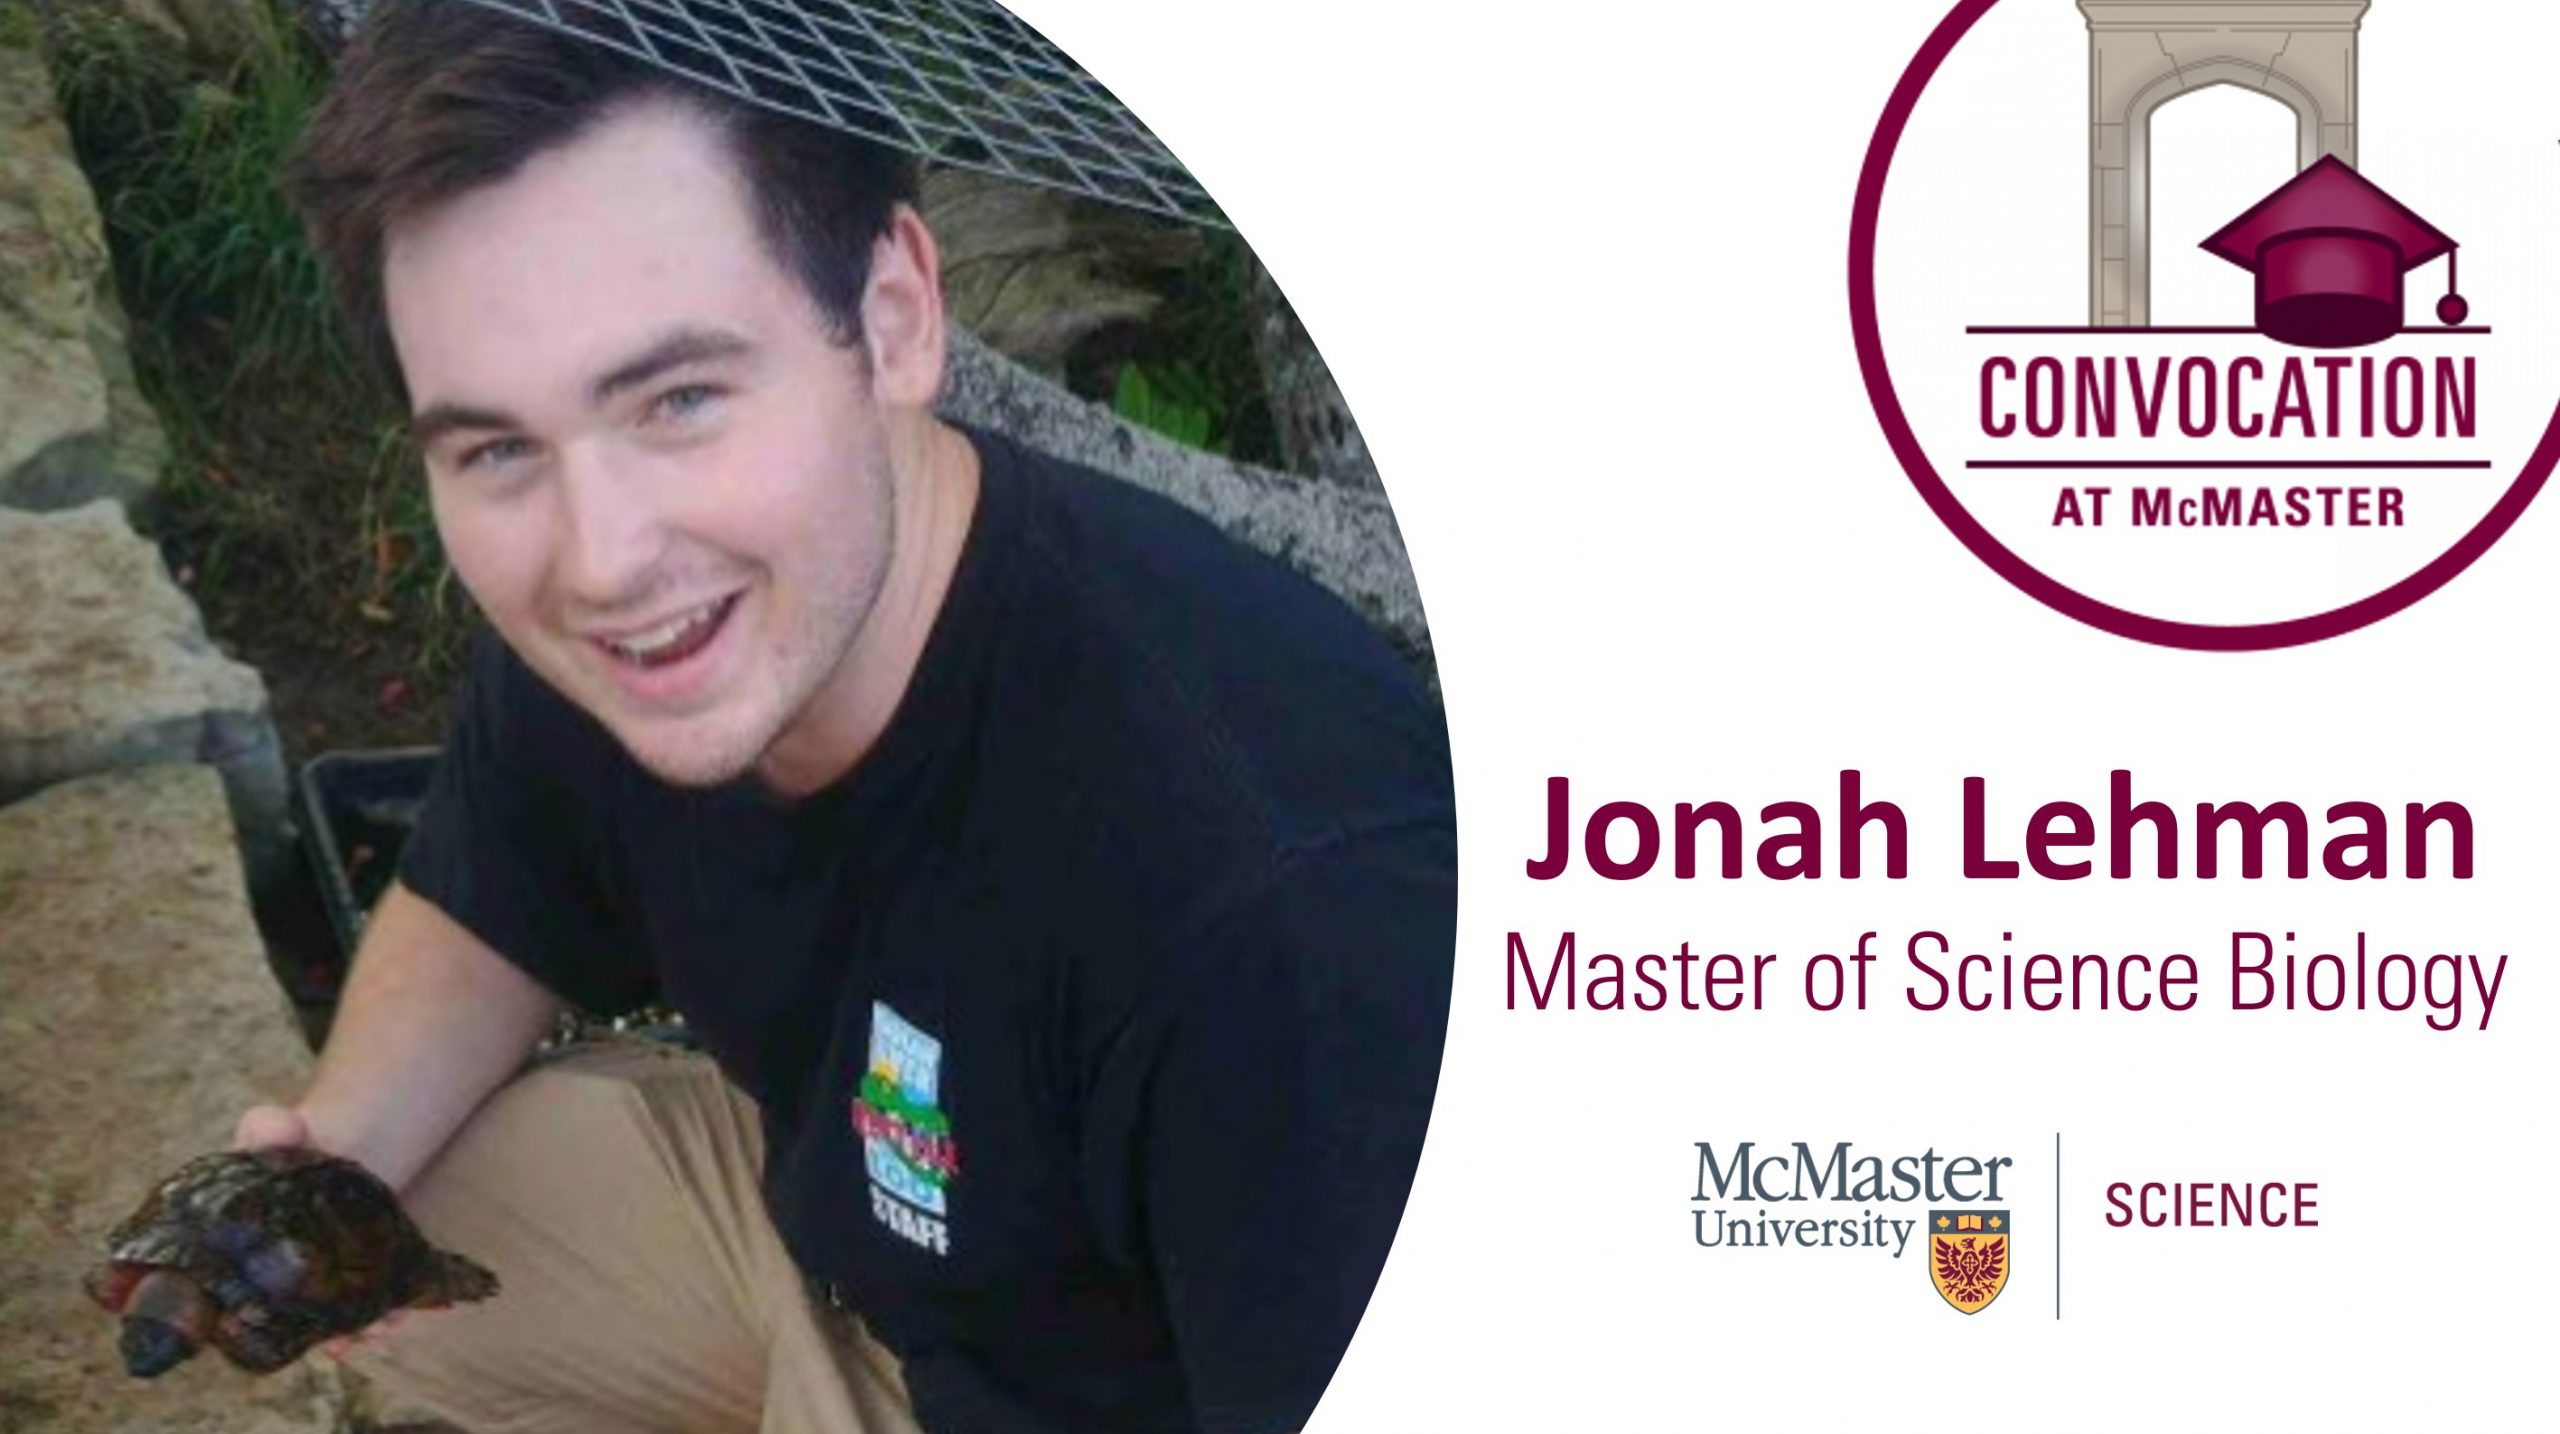 Portrait of Jonah Lehman with the convocation logo and mcmaster science logo